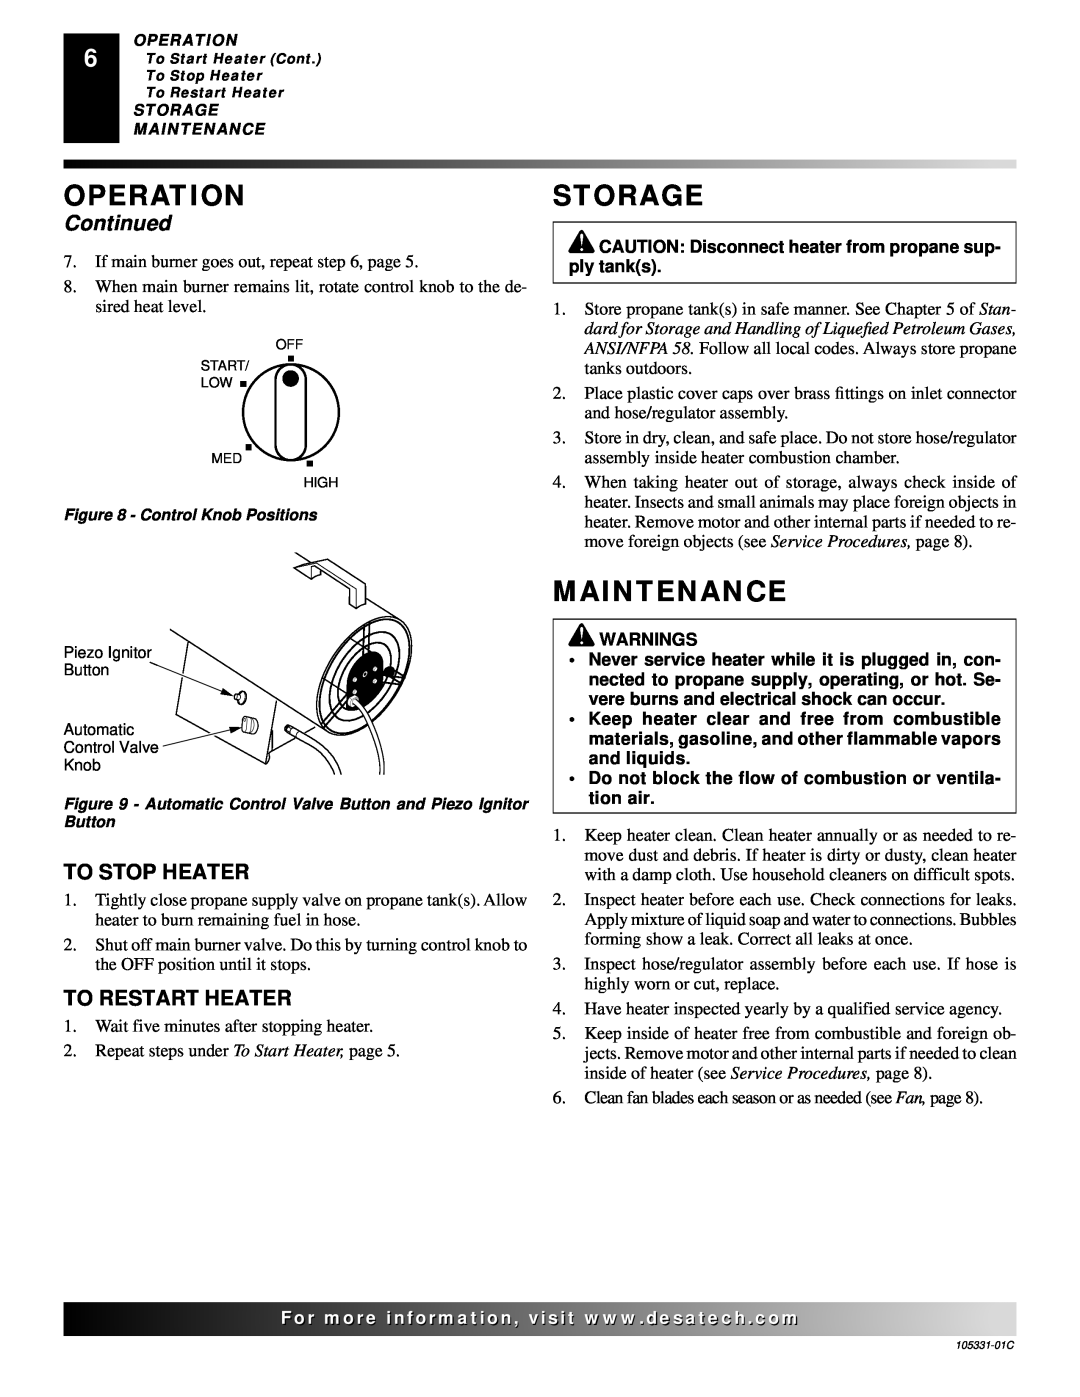 Desa ROPANE CONSTRUCTION HEATER owner manual Storage, Maintenance, Operation, Continued, Warnings 